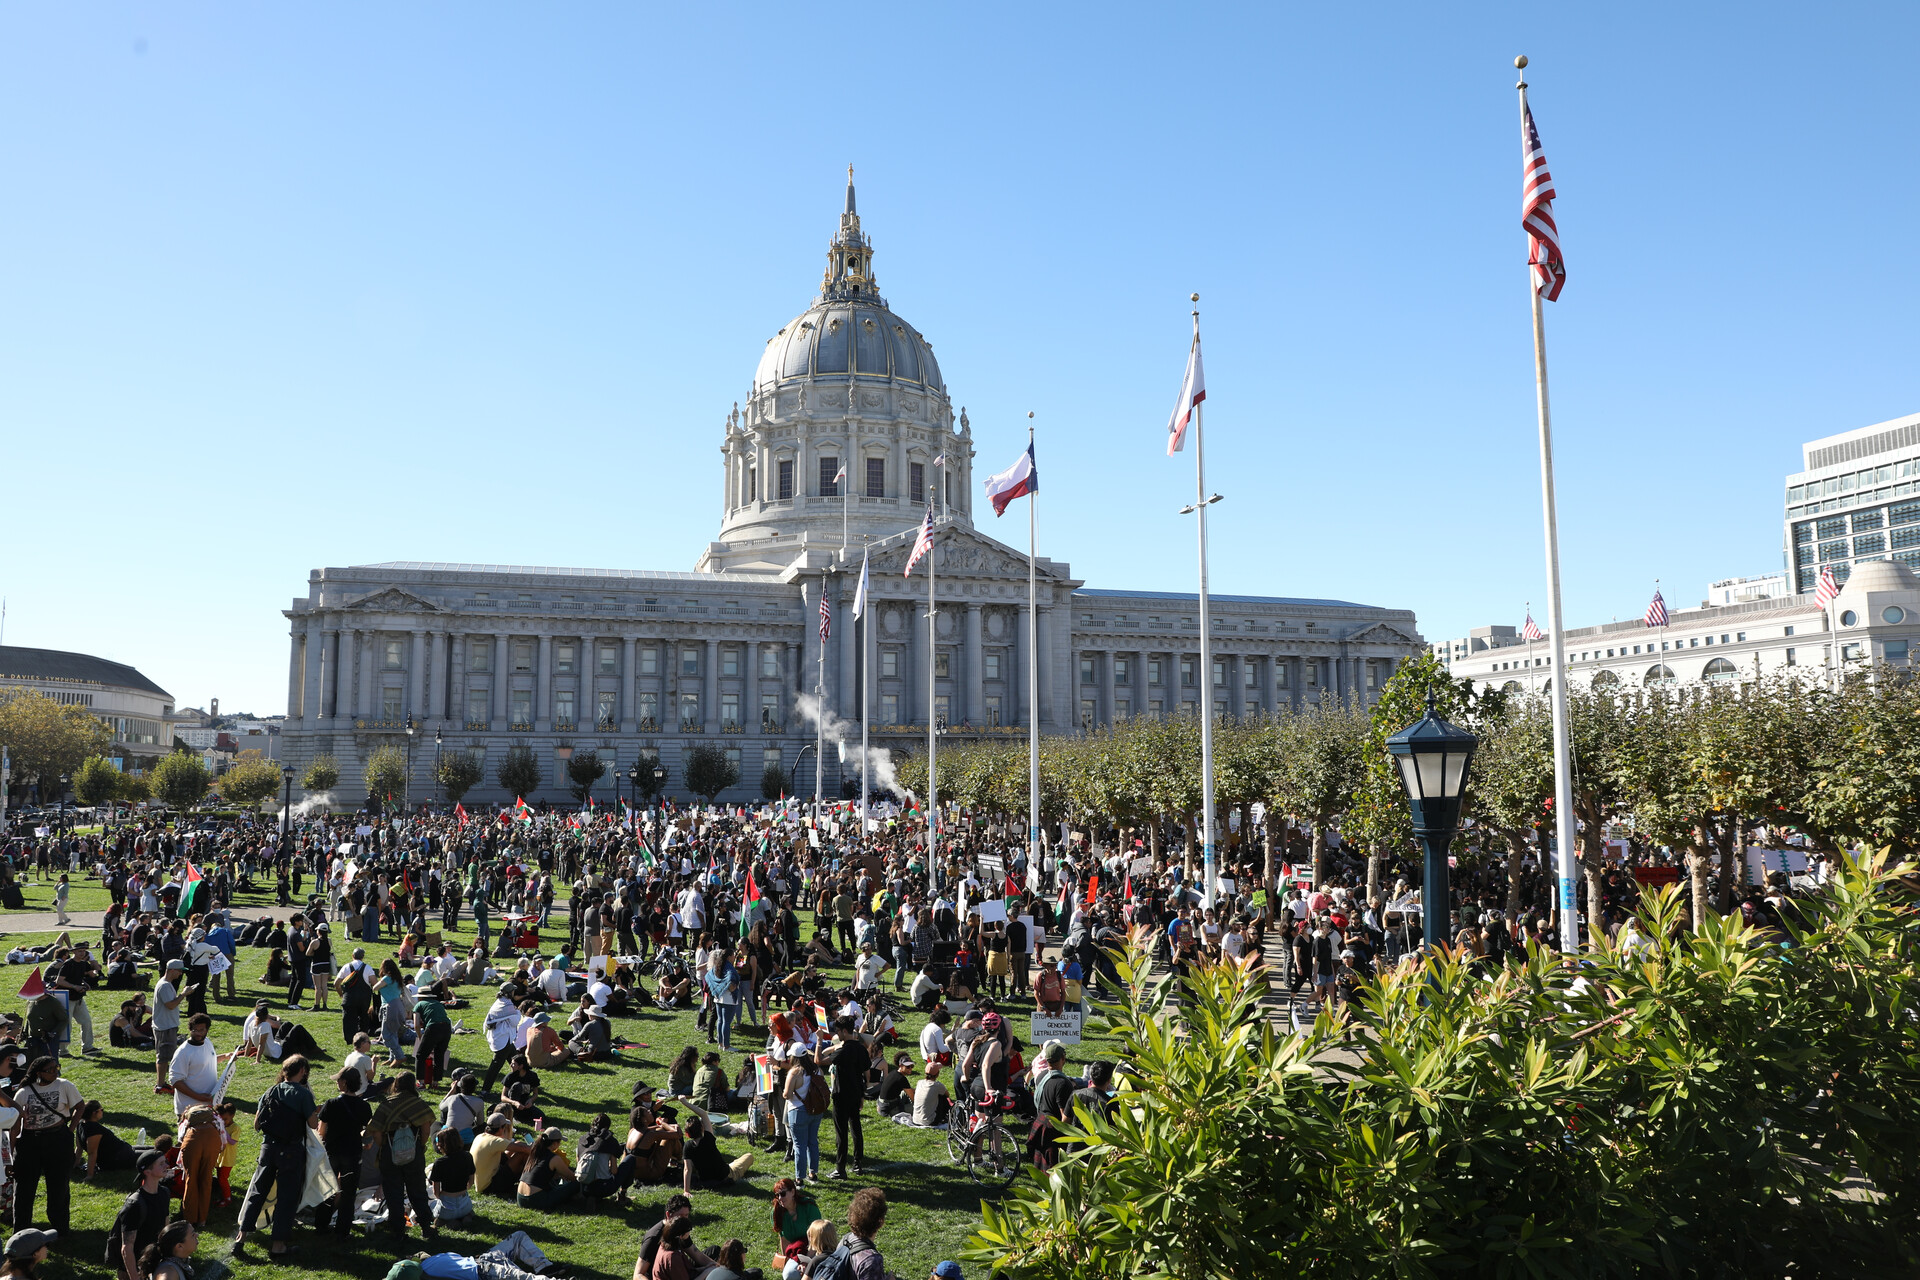 A crowd of people on the lawn in front of San Francisco City Hall in the background.